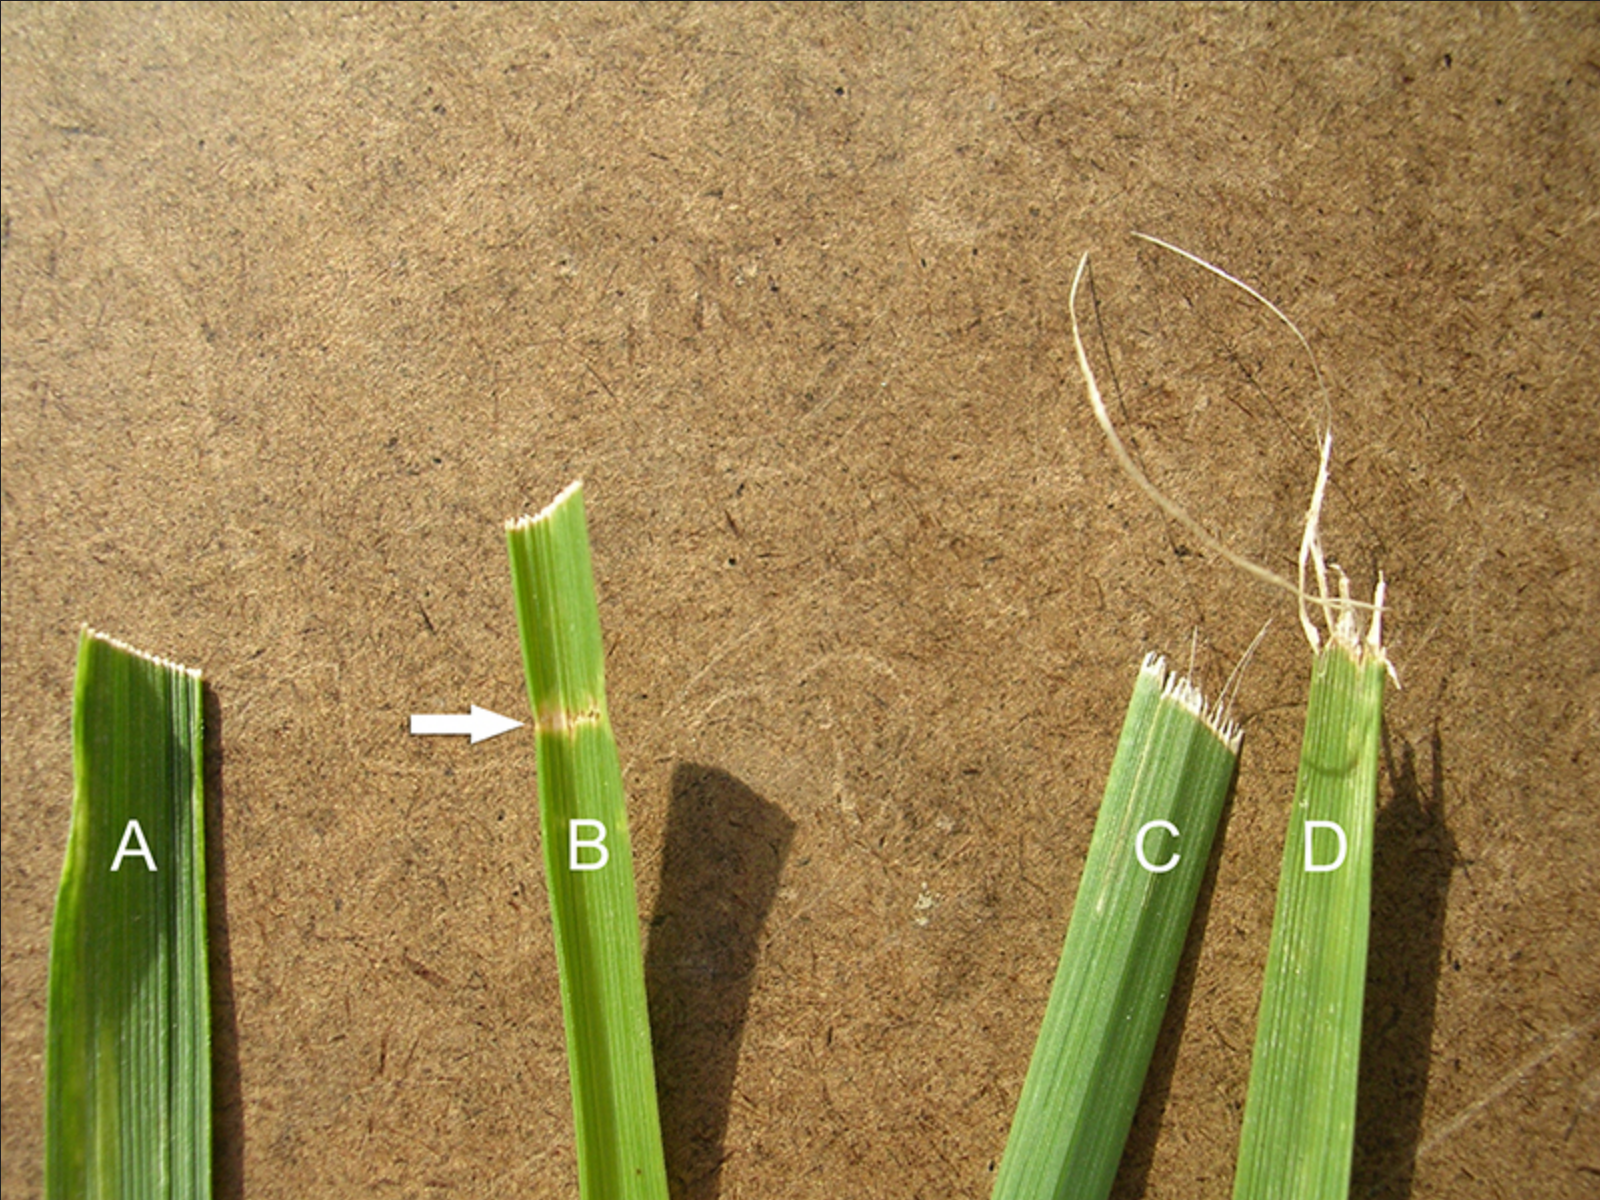 Comparison of grass blades cut with differant blades and sharpness.